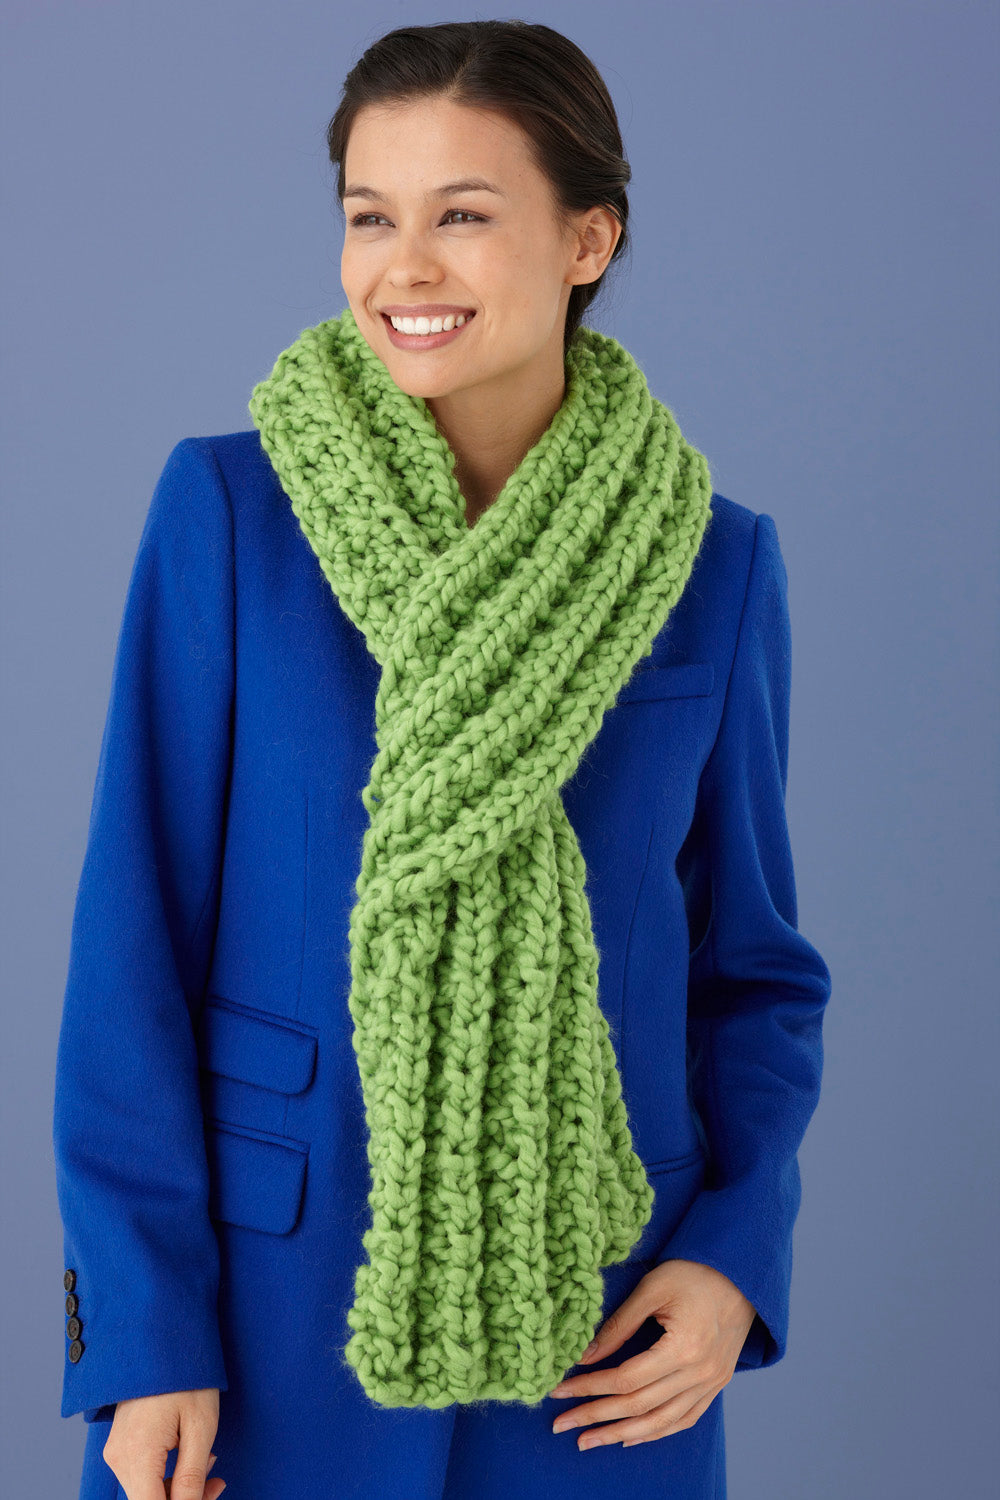 How to Loom Knit an Infinity Ribbed Scarf using a Long Loom (DIY